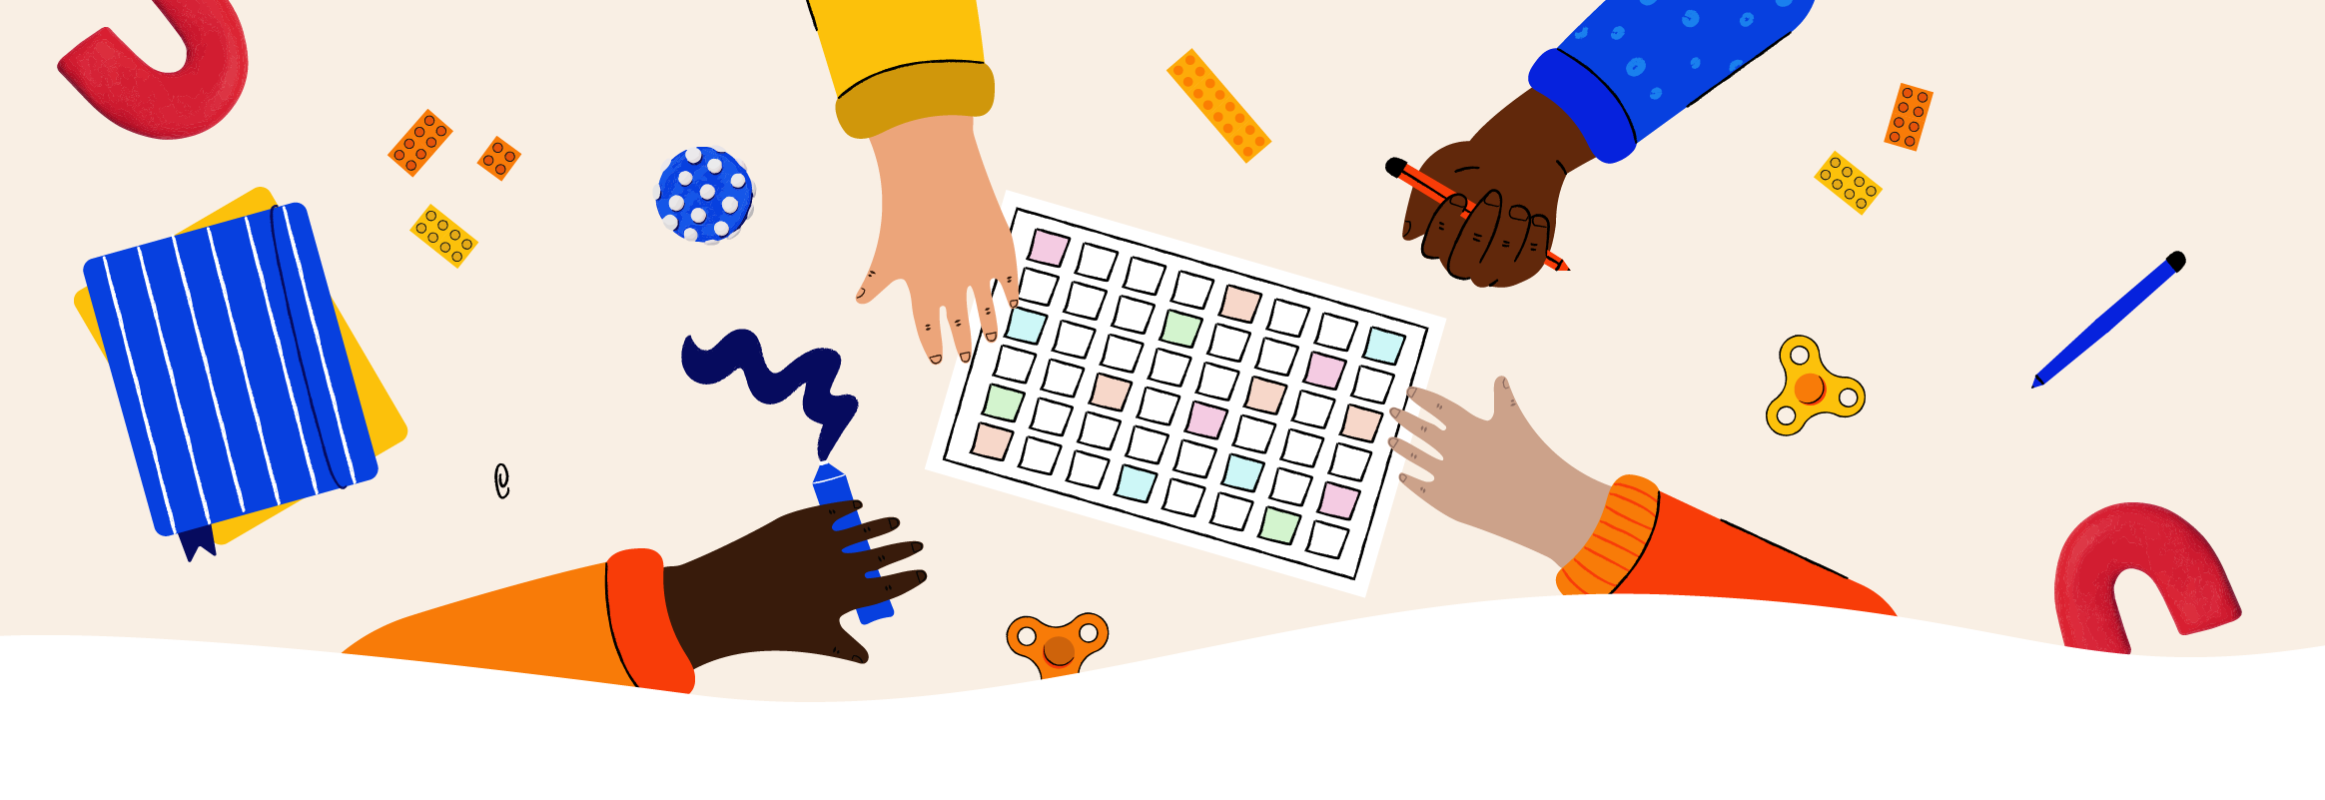 An illustration of hands reaching out to touch AAC core word board from different sides